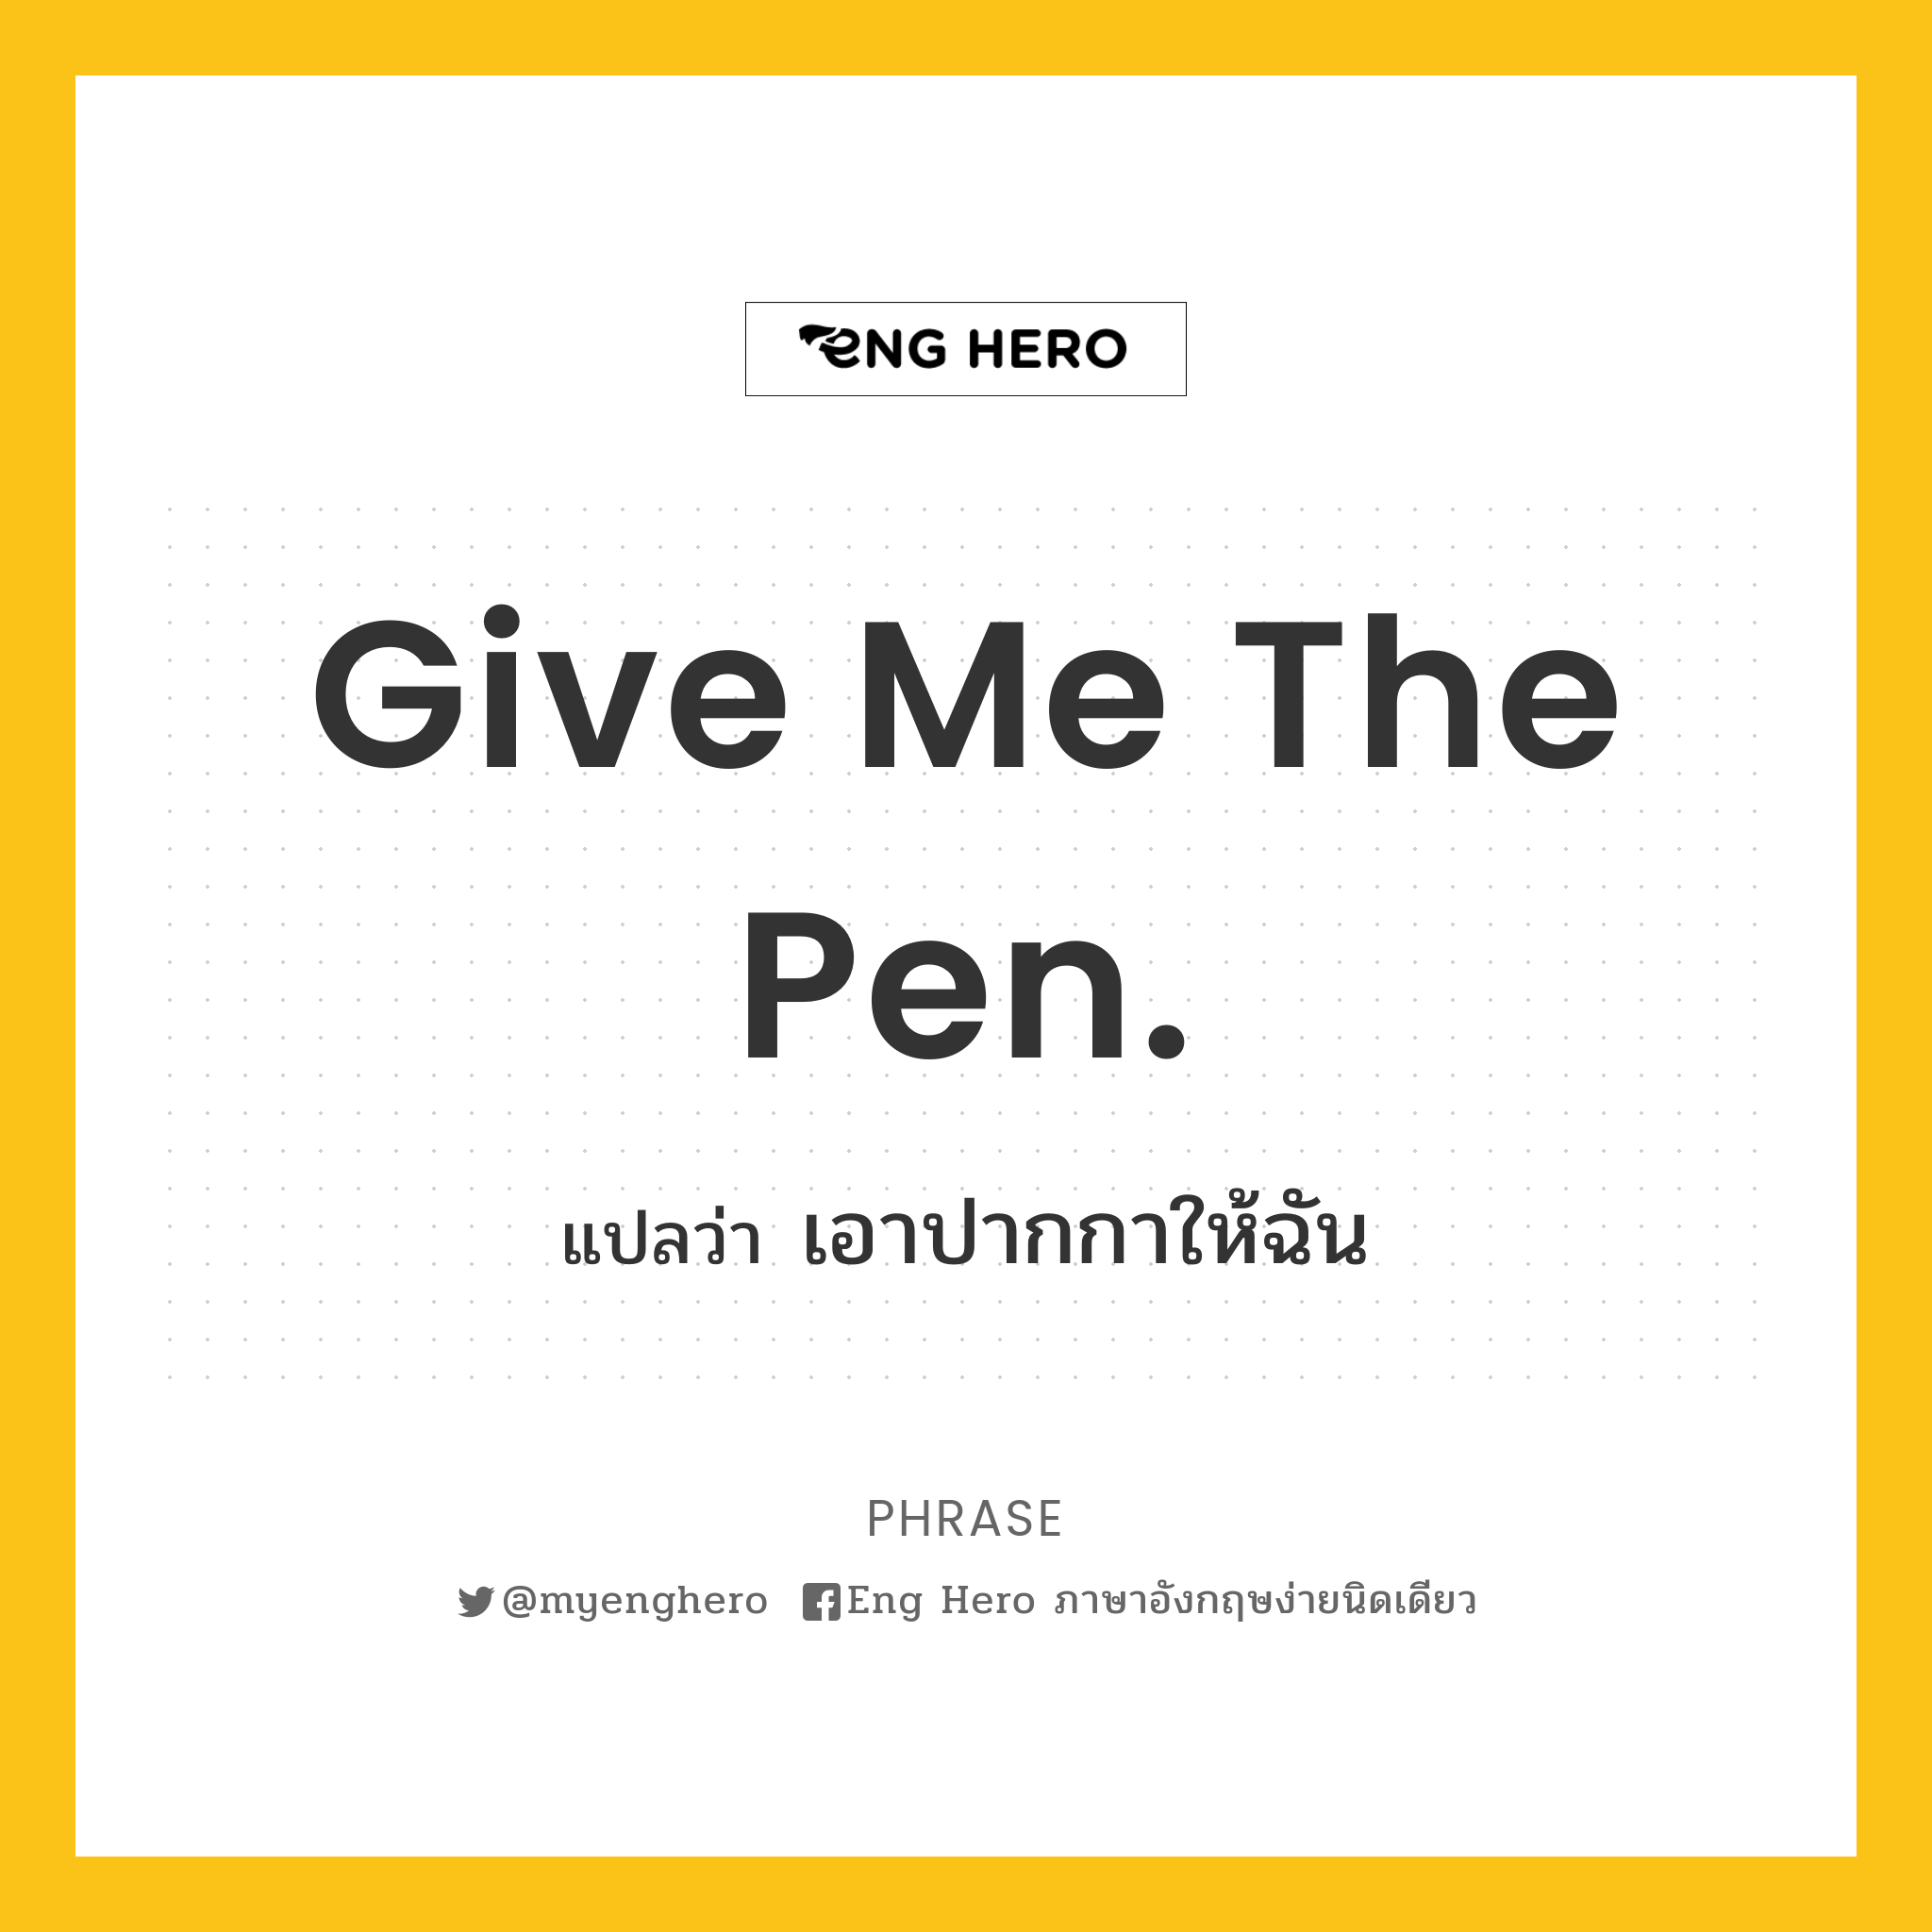 Give me the pen.